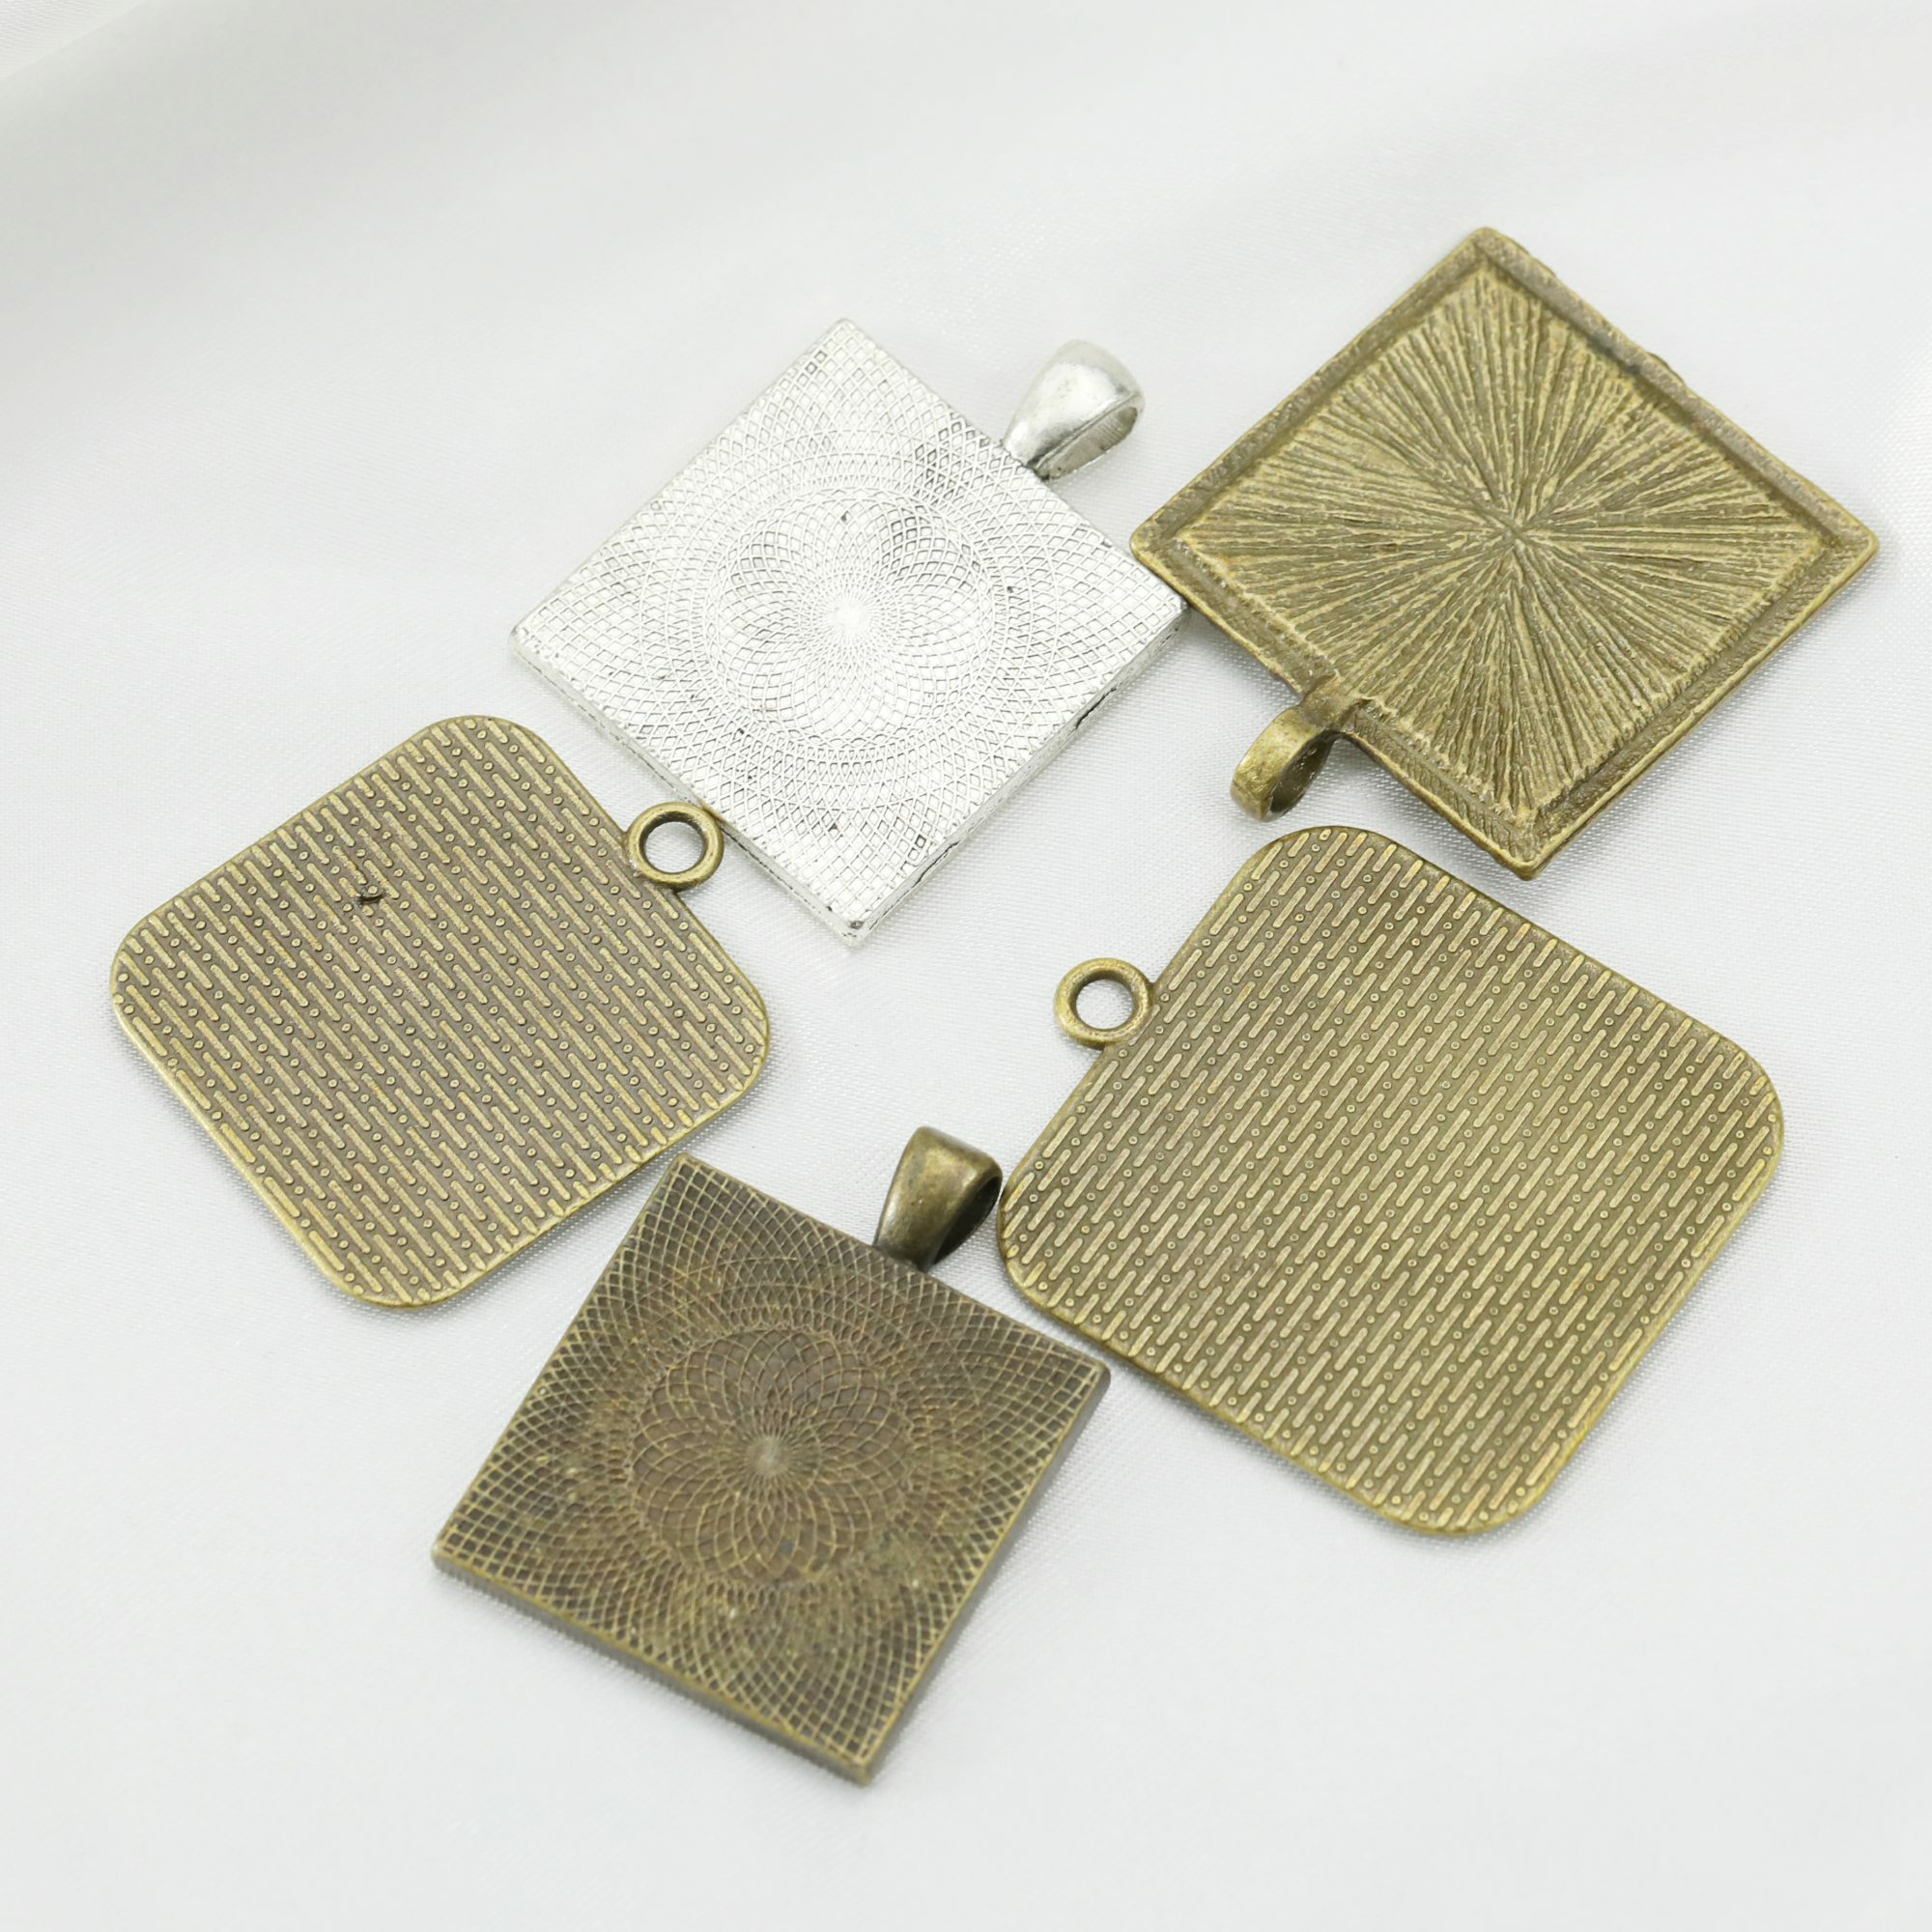 20Pcs Assortment 25MM Square Antiqued Bronze Pendant Settings for Resin DIY Jewelry Supplies 1431127 - Click Image to Close